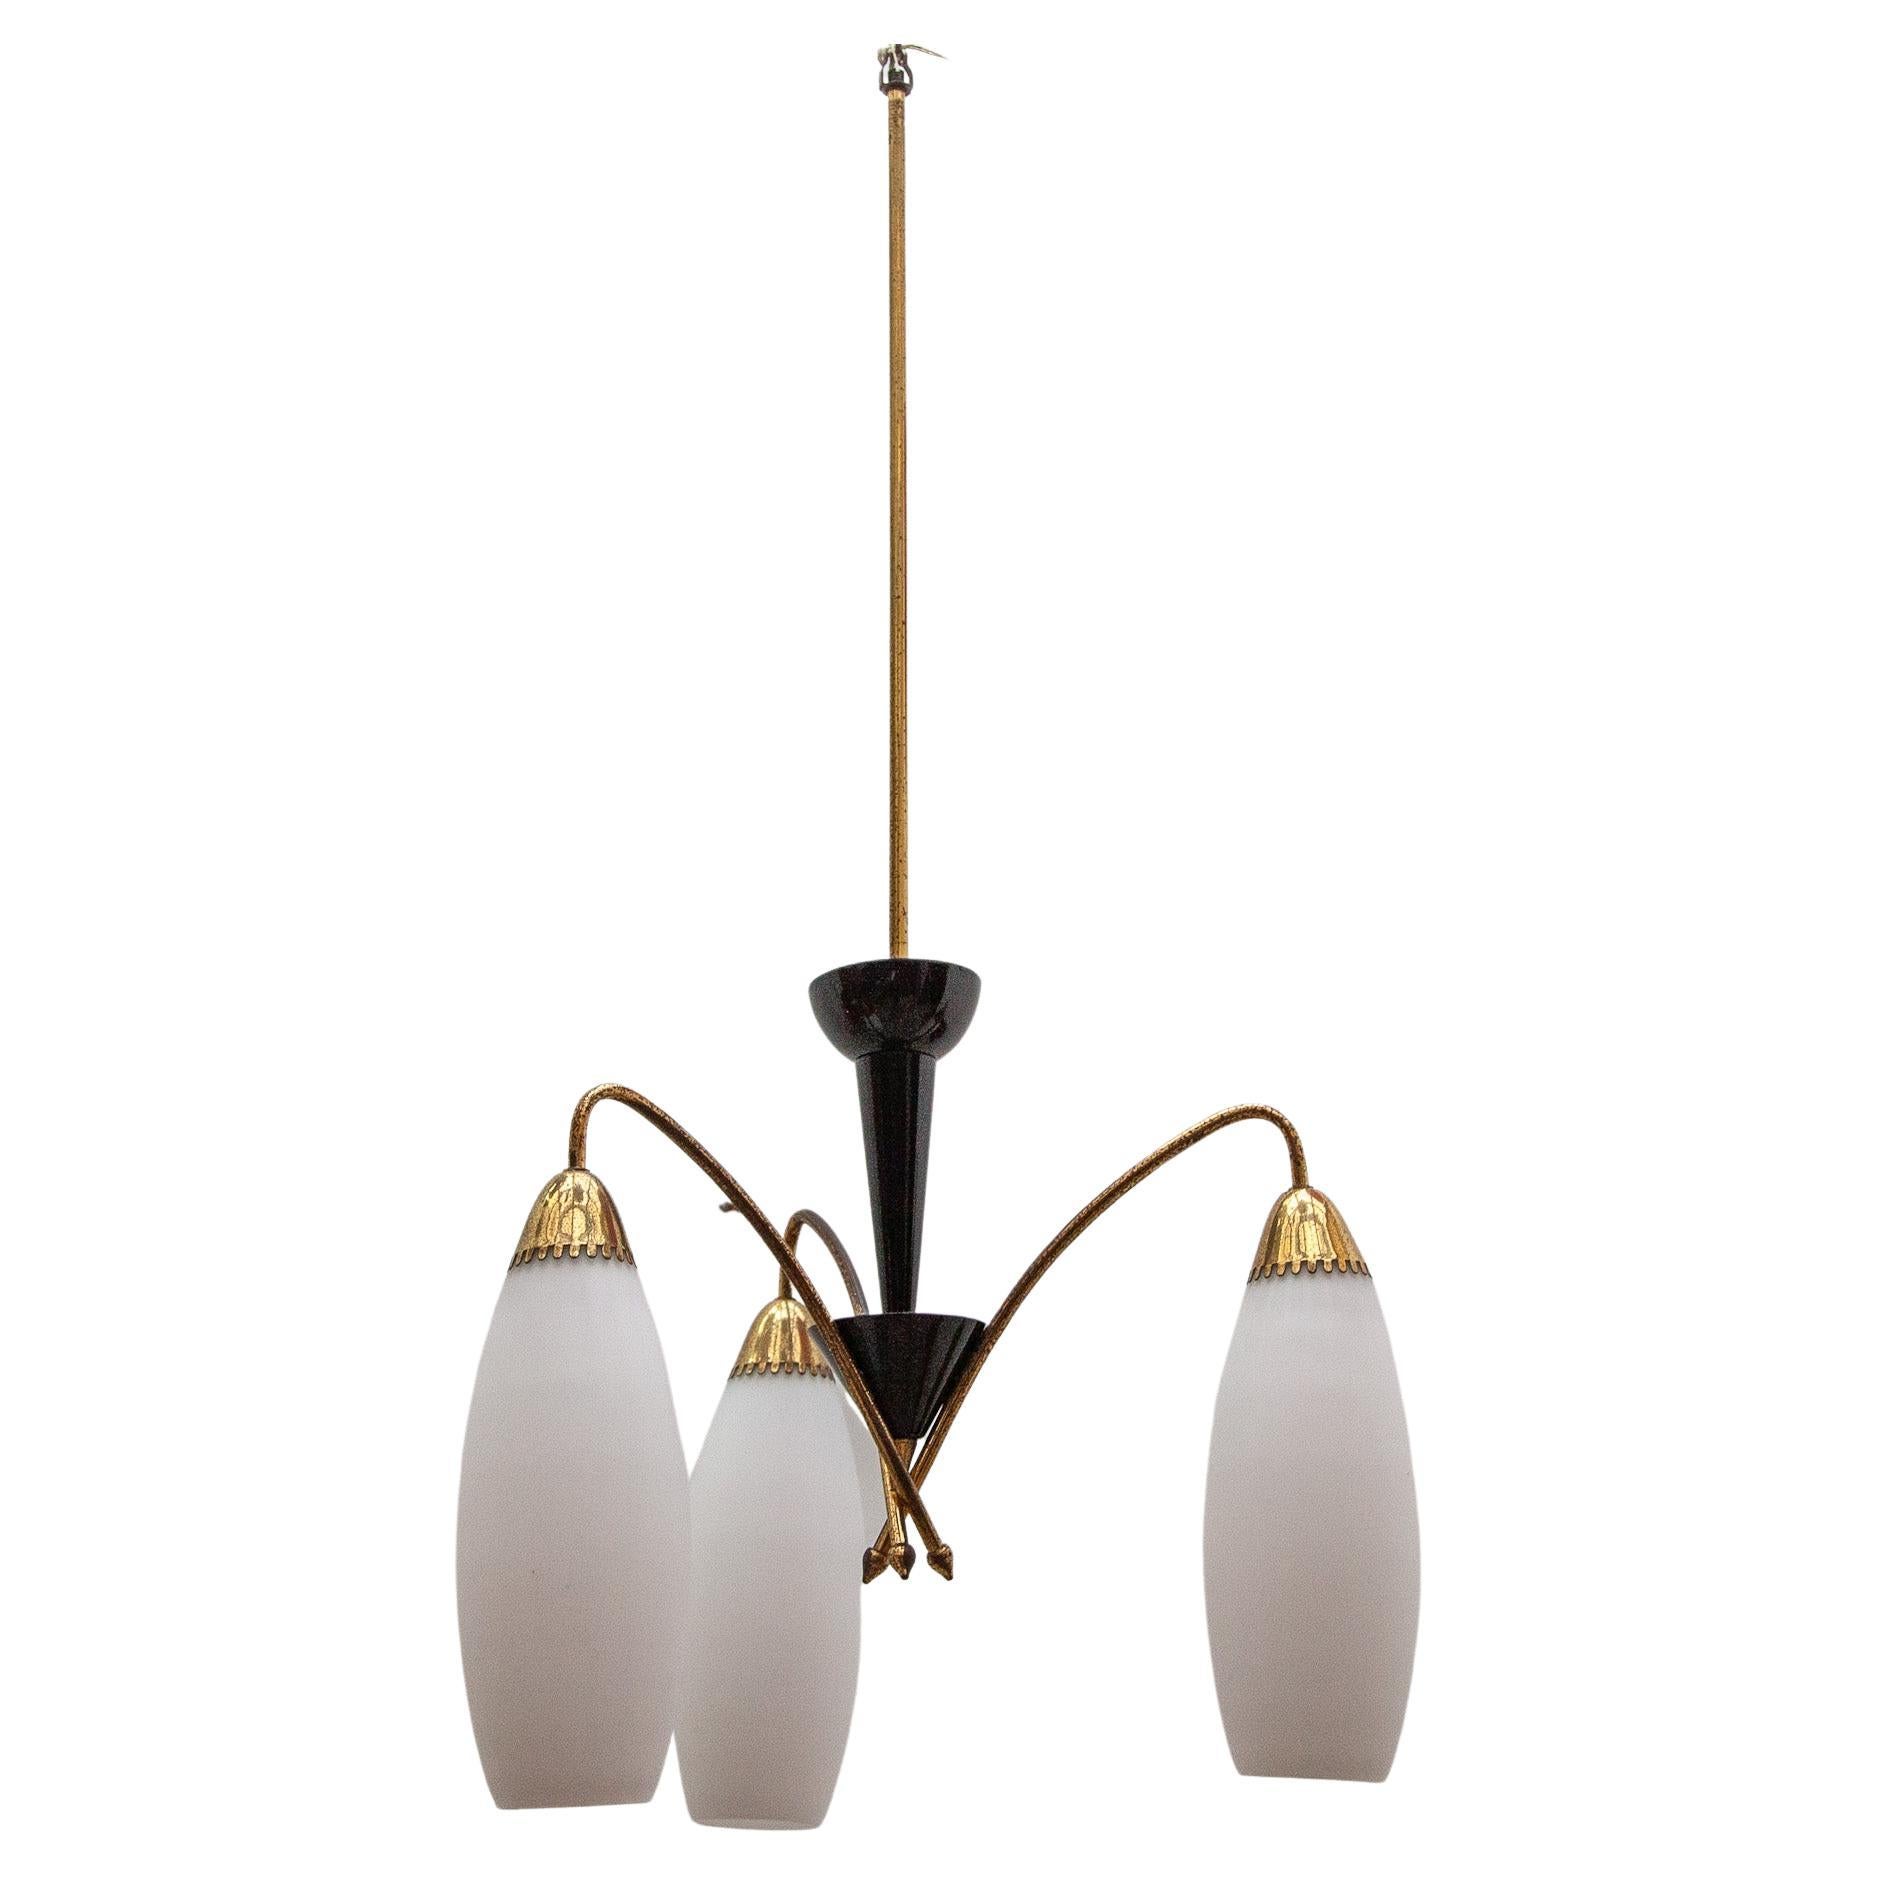 This chic 1950's Italian chandelier comprises three arms with opaque glass shades held in place by brass lamp holders on either end. This is mounted on a brass column with black tulip and ceiling rose.